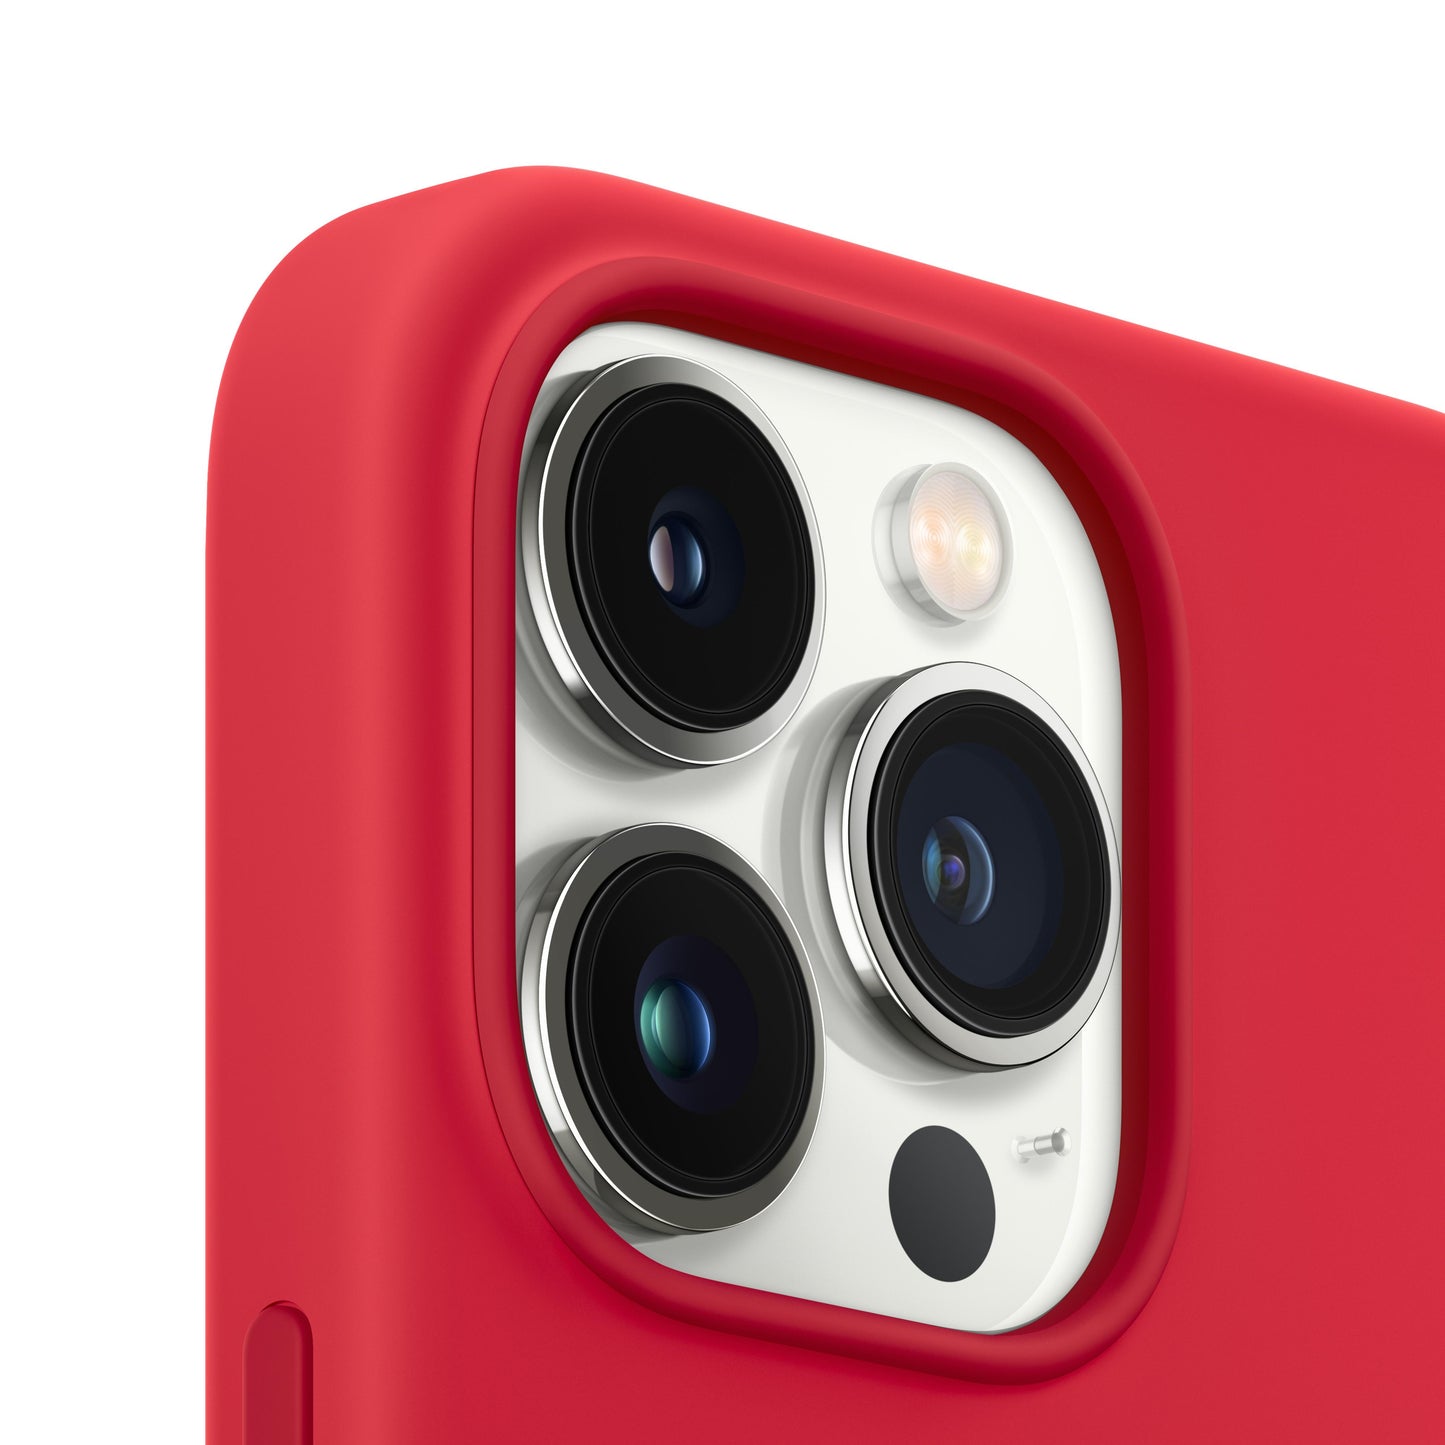 iPhone 13 Pro Max Silicone Case with MagSafe - (PRODUCT)RED